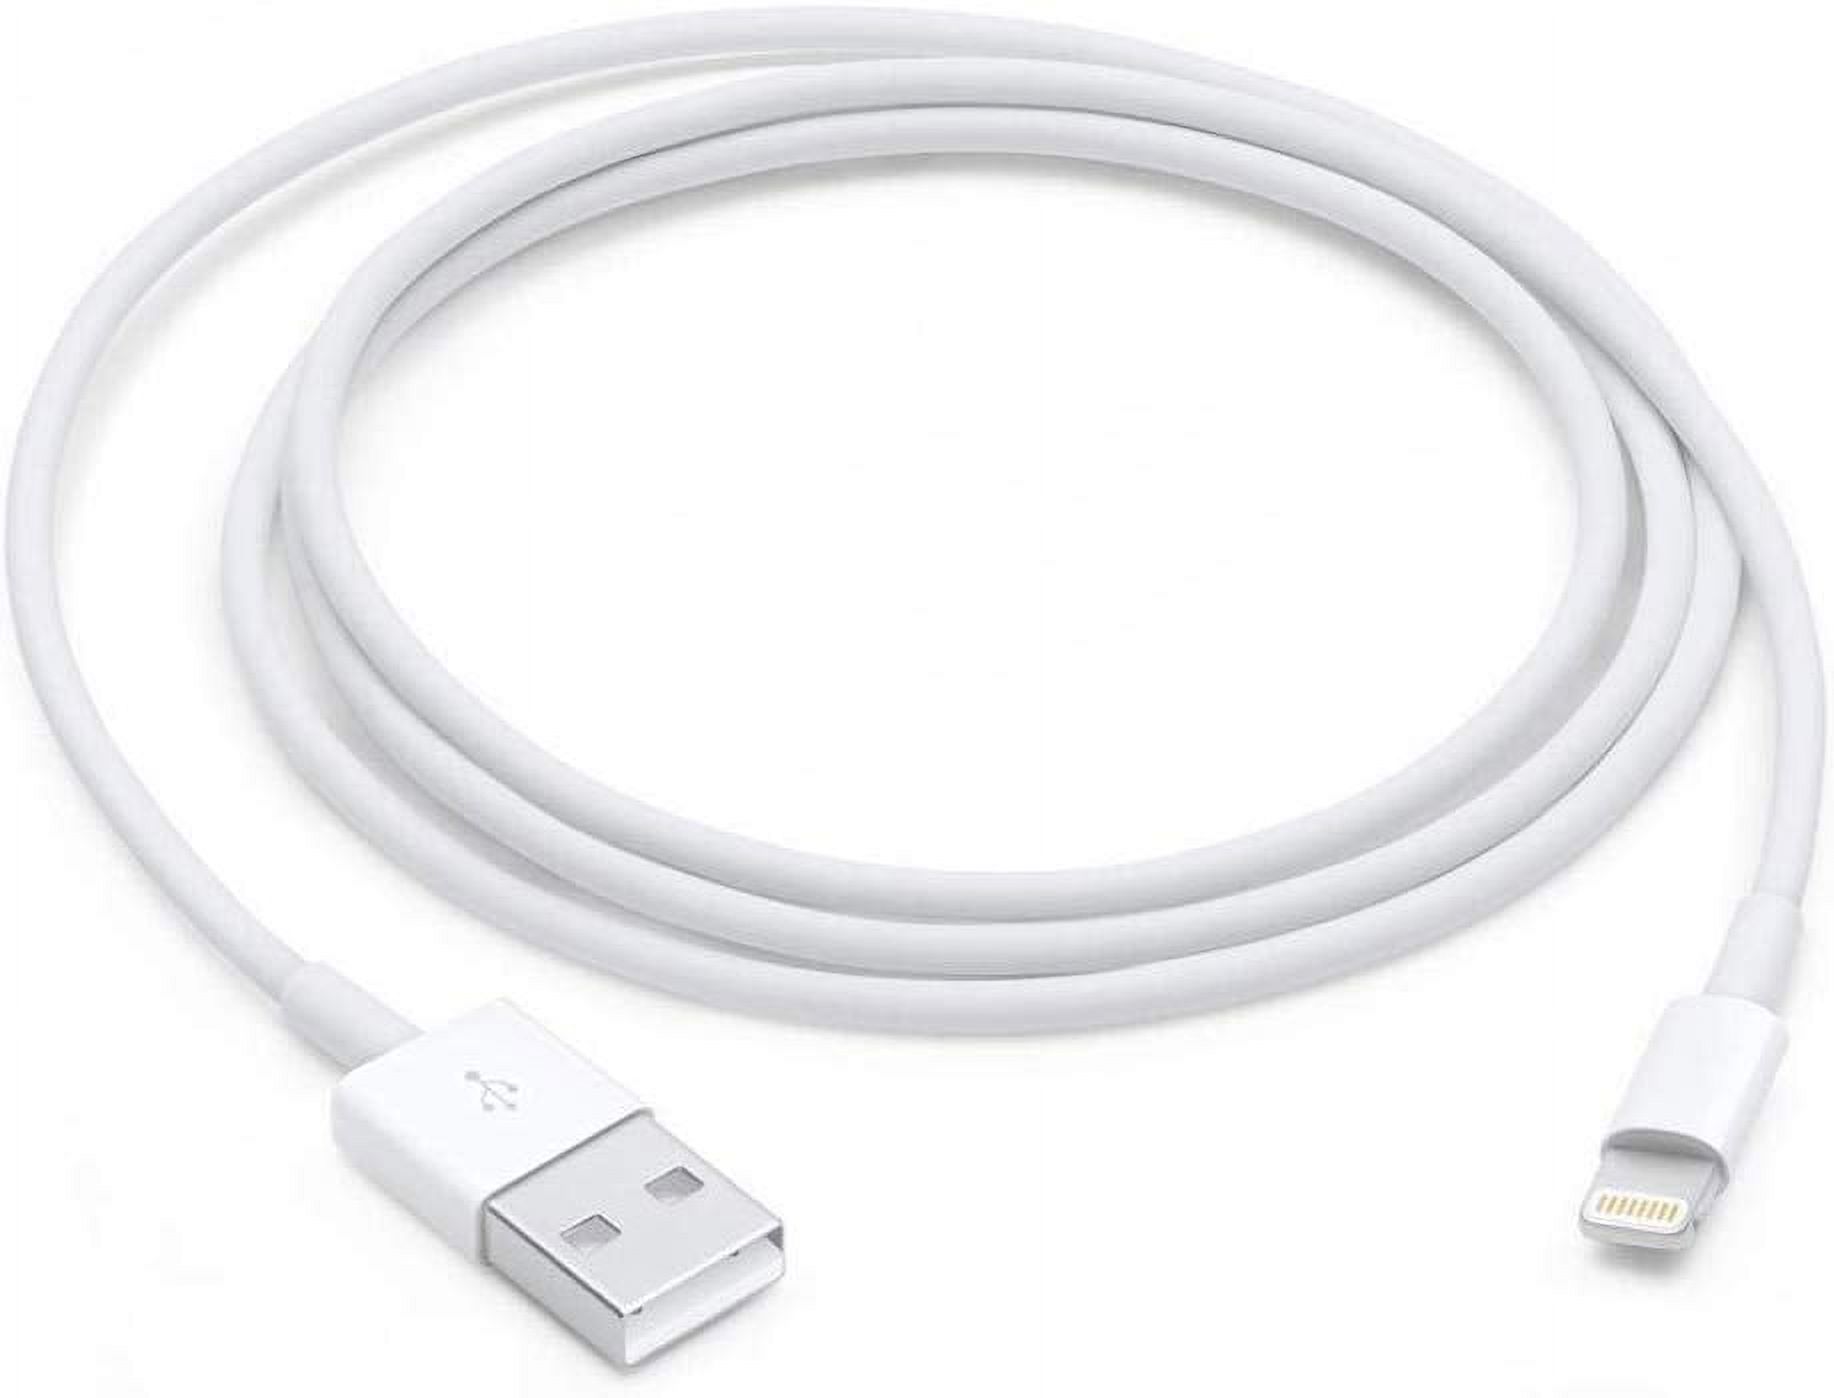 Apple Lightning to USB Cable (1m) - White - image 2 of 4